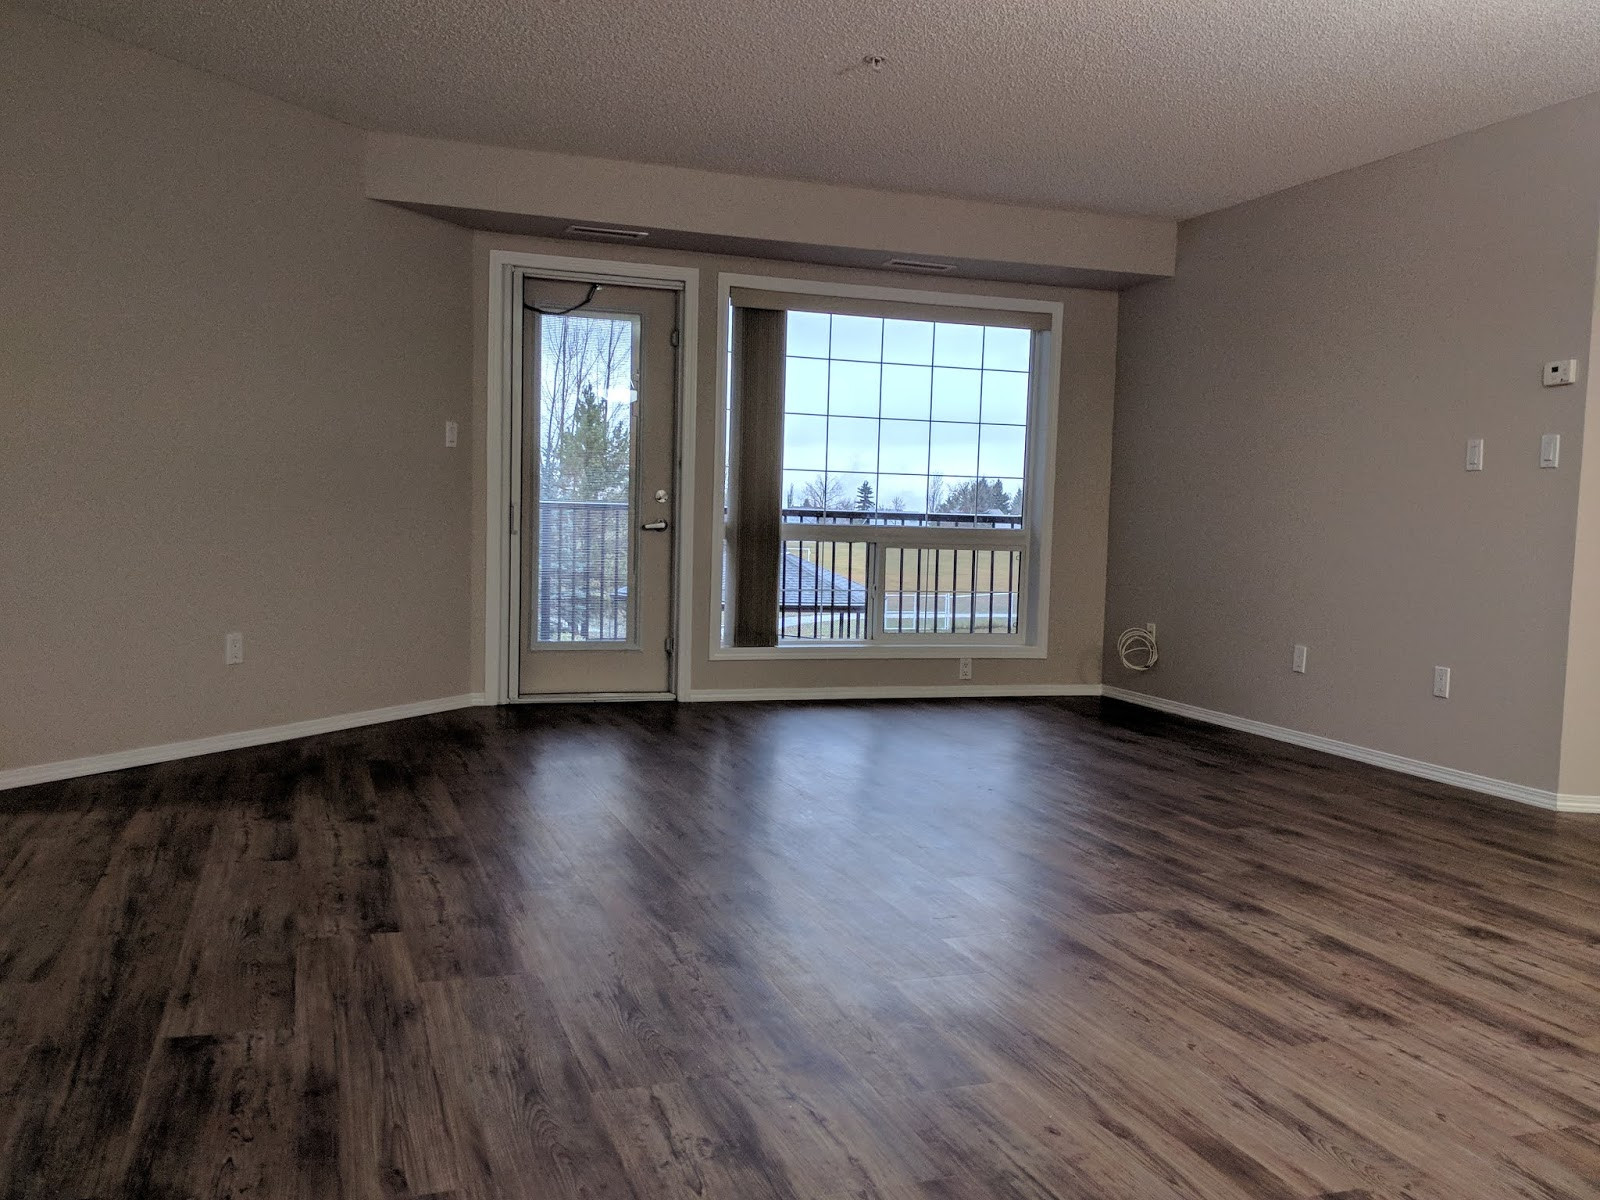 27 Unique Alberta Hardwood Flooring Reviews 2024 free download alberta hardwood flooring reviews of beaumont aging in place society place beausejour with list 310000 300000